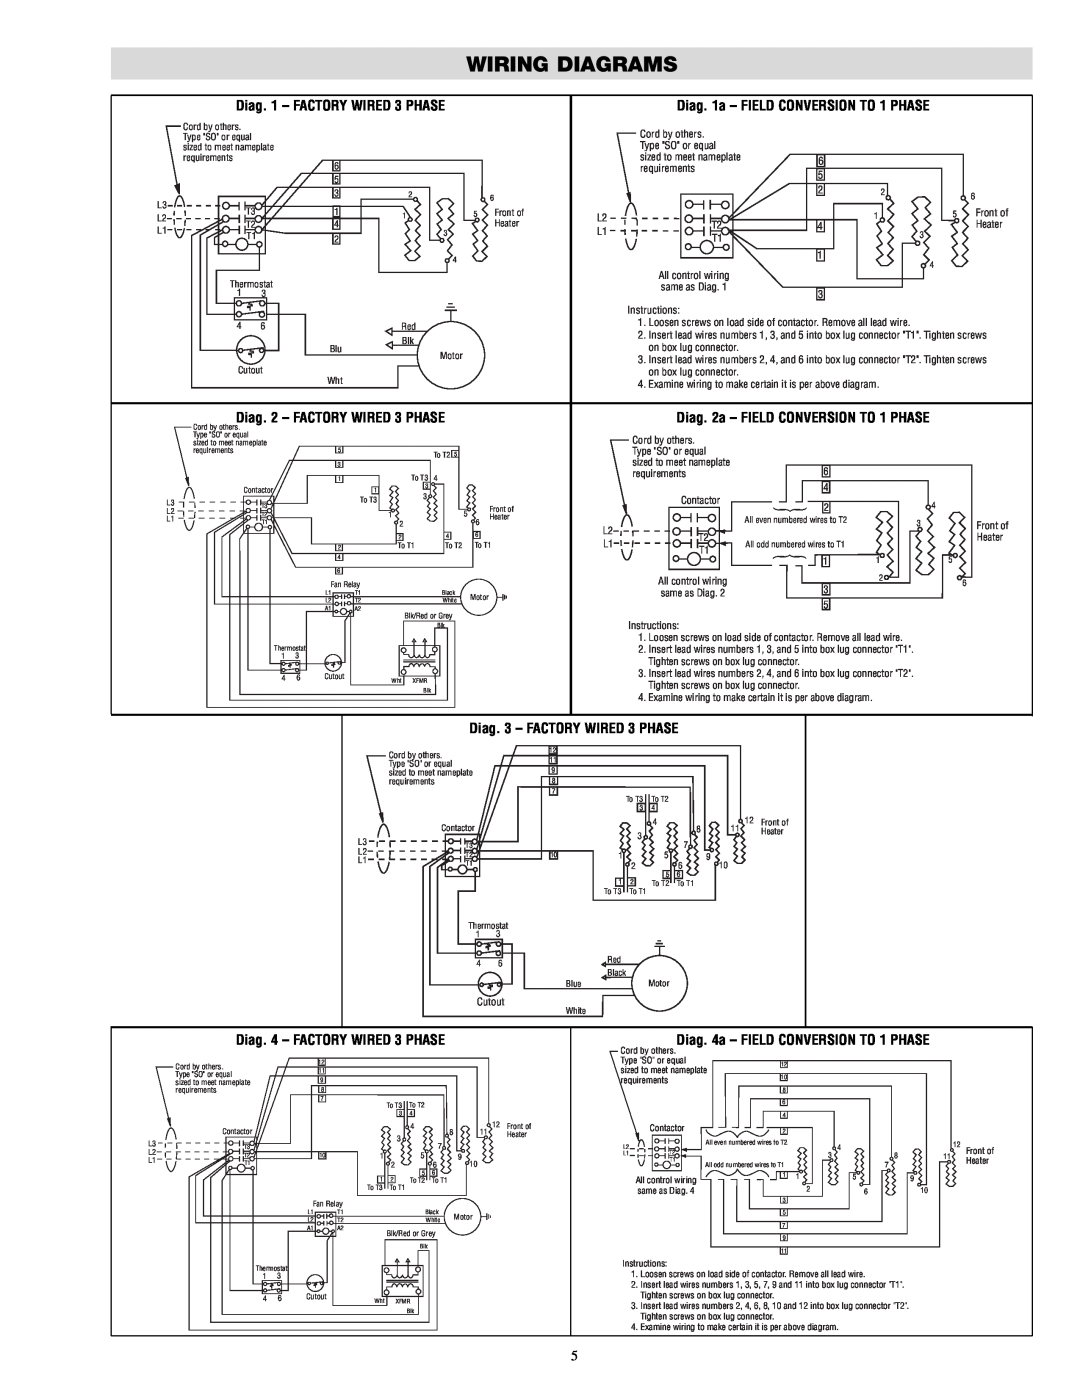 Chromalox PF497-1 specifications Wiring Diagrams, Diag. 3 - FACTORY WIRED 3 PHASE, Diag. 4 - FACTORY WIRED 3 PHASE 